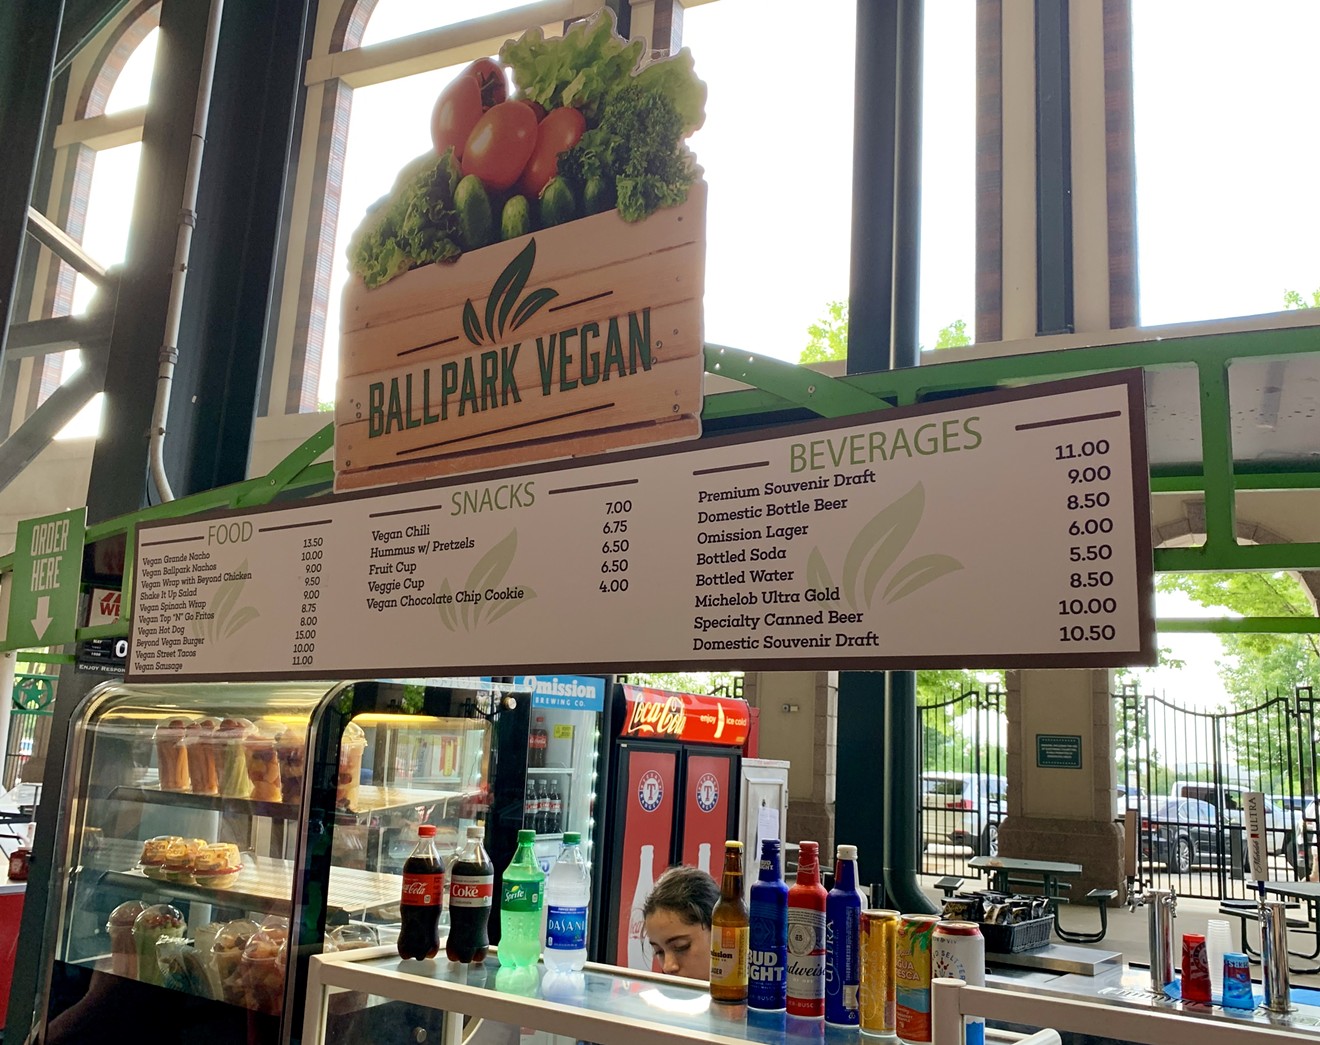 The Ballpark Vegan stand has new offerings this year, giving meat-free Rangers fans more dining options.